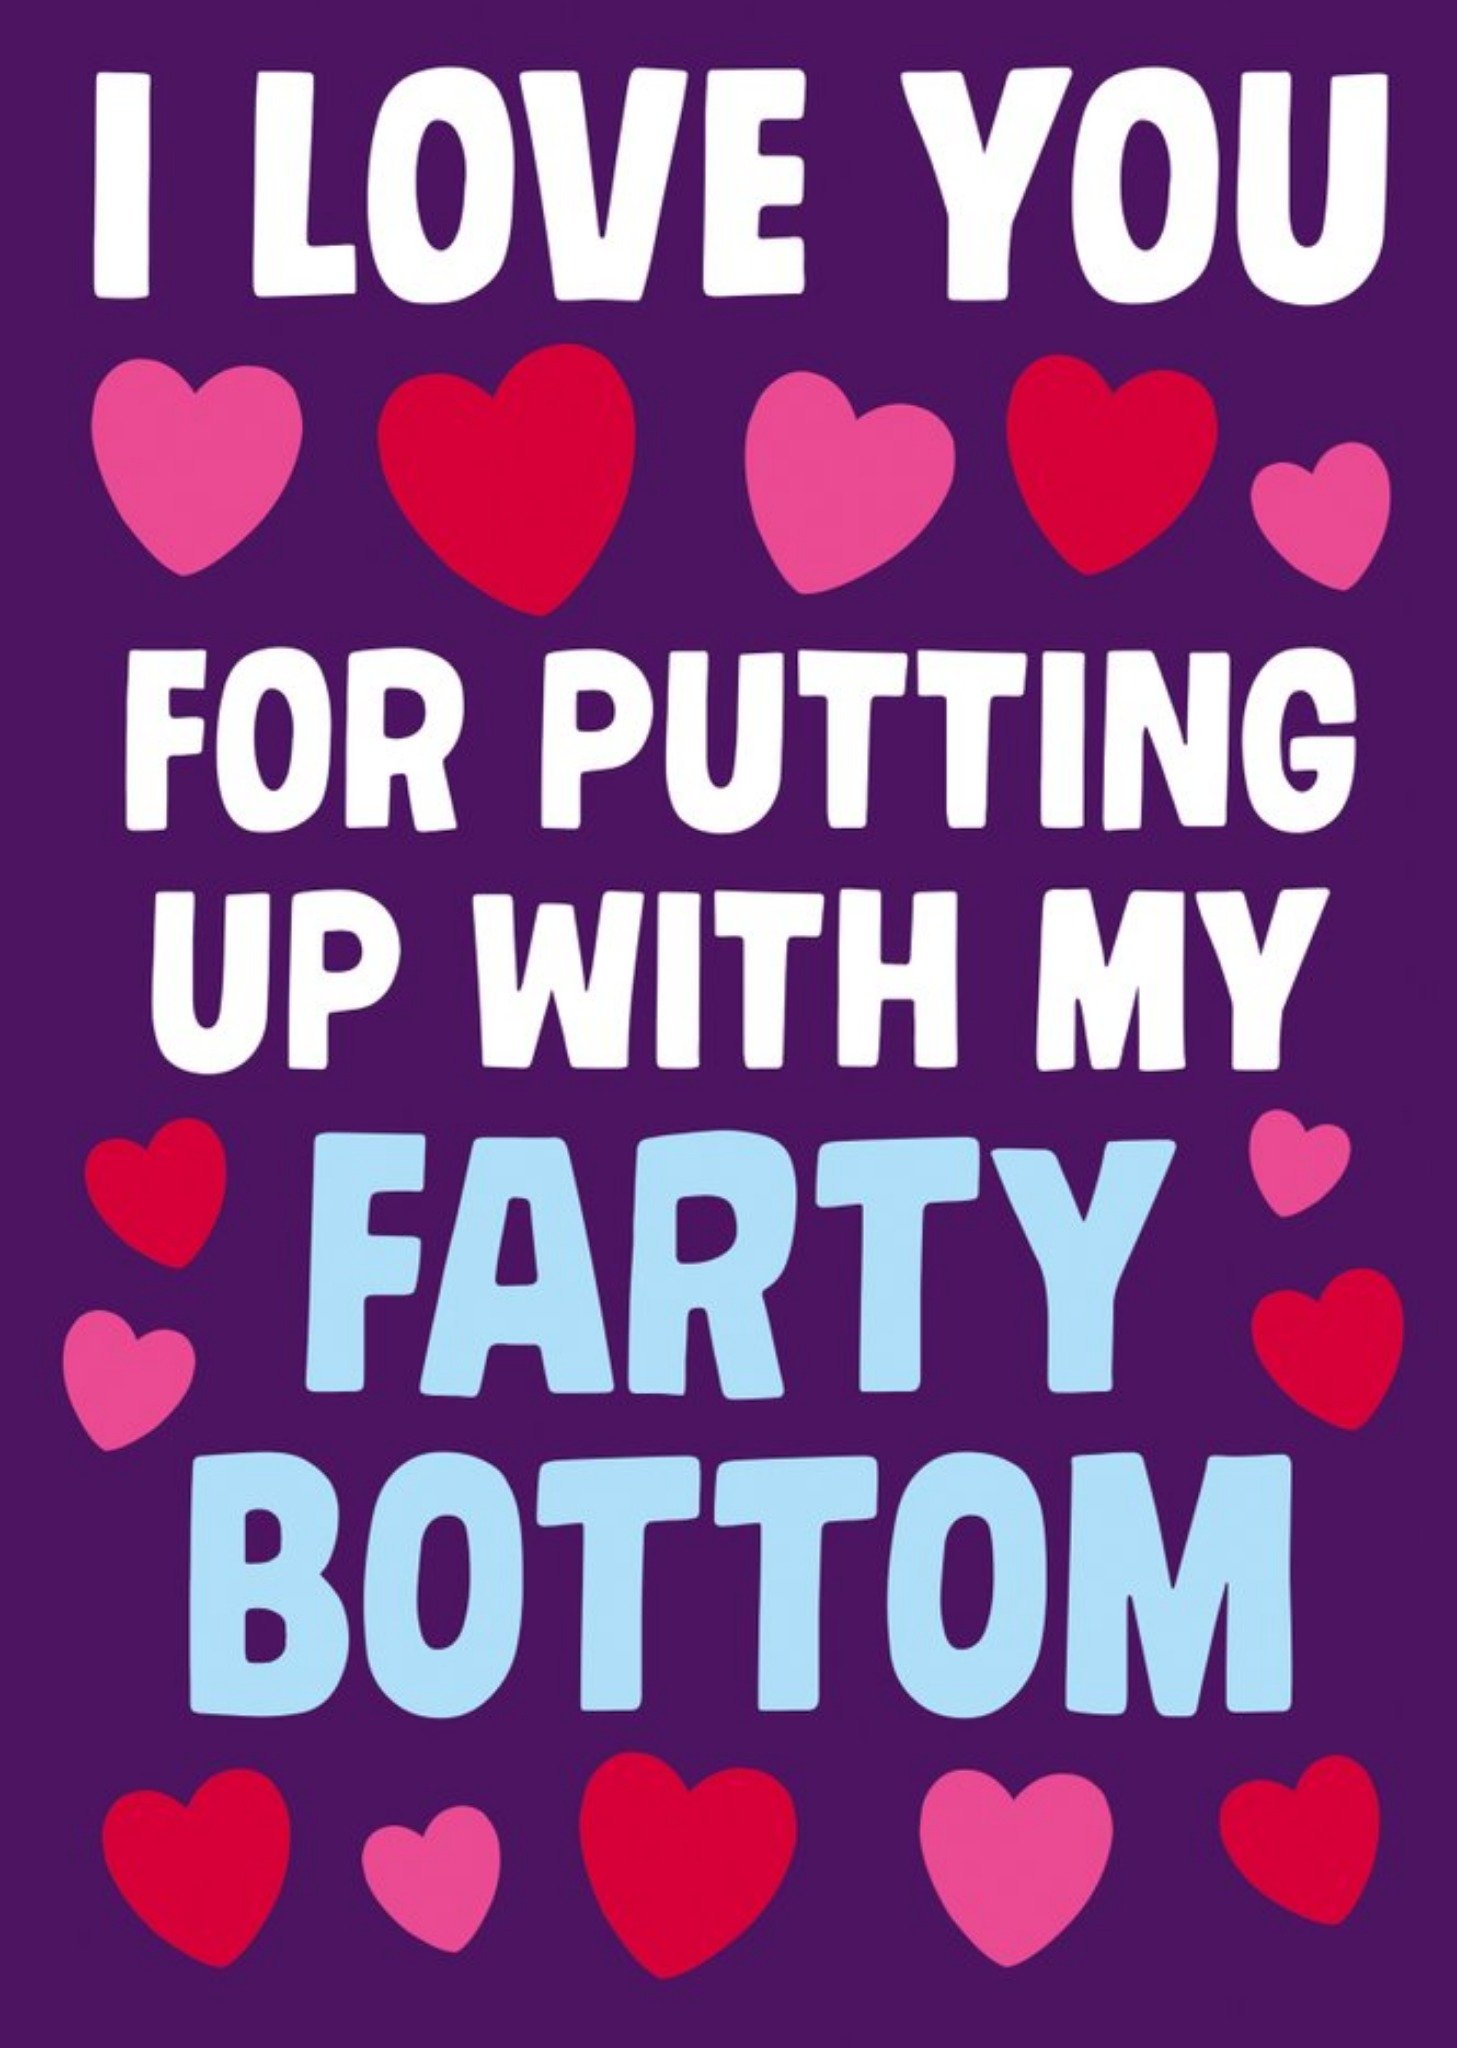 Moonpig Dean Morris Farty Bottom Funny Anniversary Card, Large